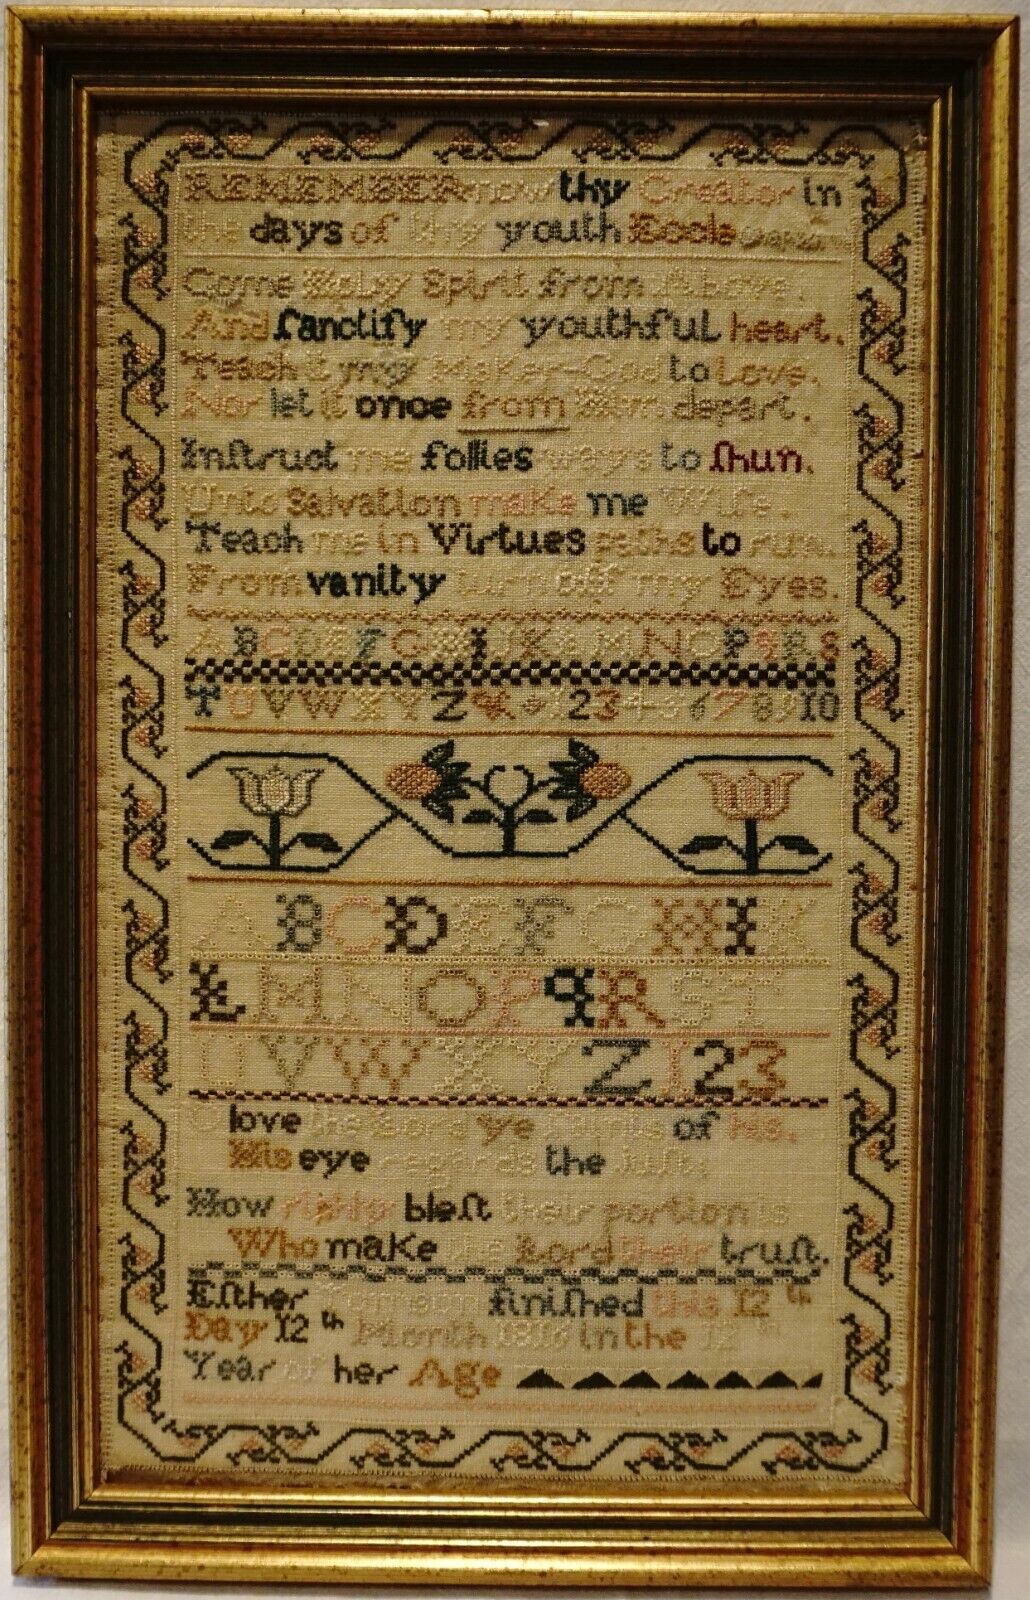 SMALL EARLY 19TH CENTURY VERSE & ALPHABET SAMPLER BY ESTHER TOMSON - 1816